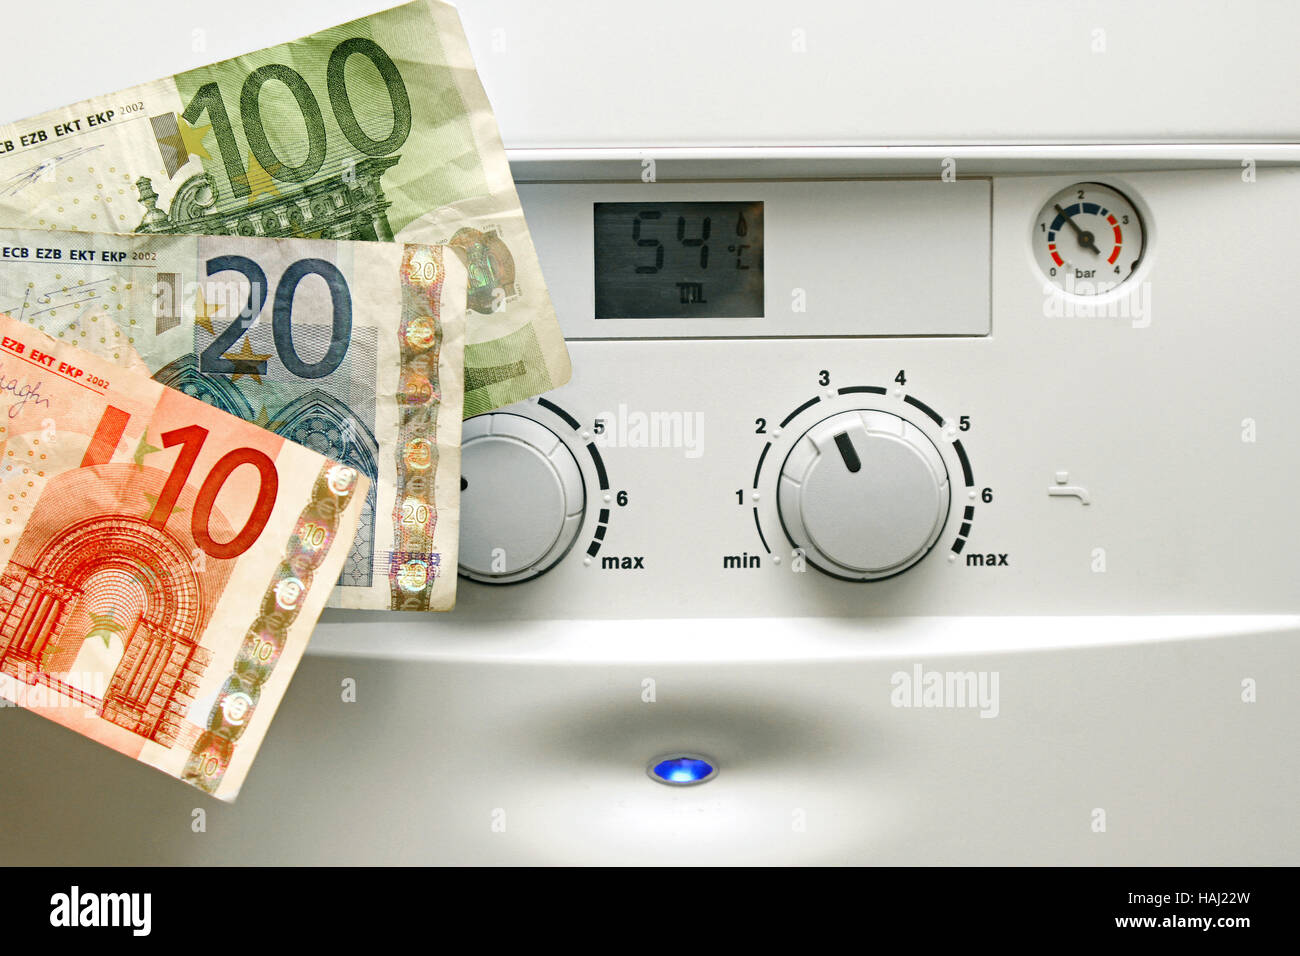 house heating boiler and euro money Stock Photo